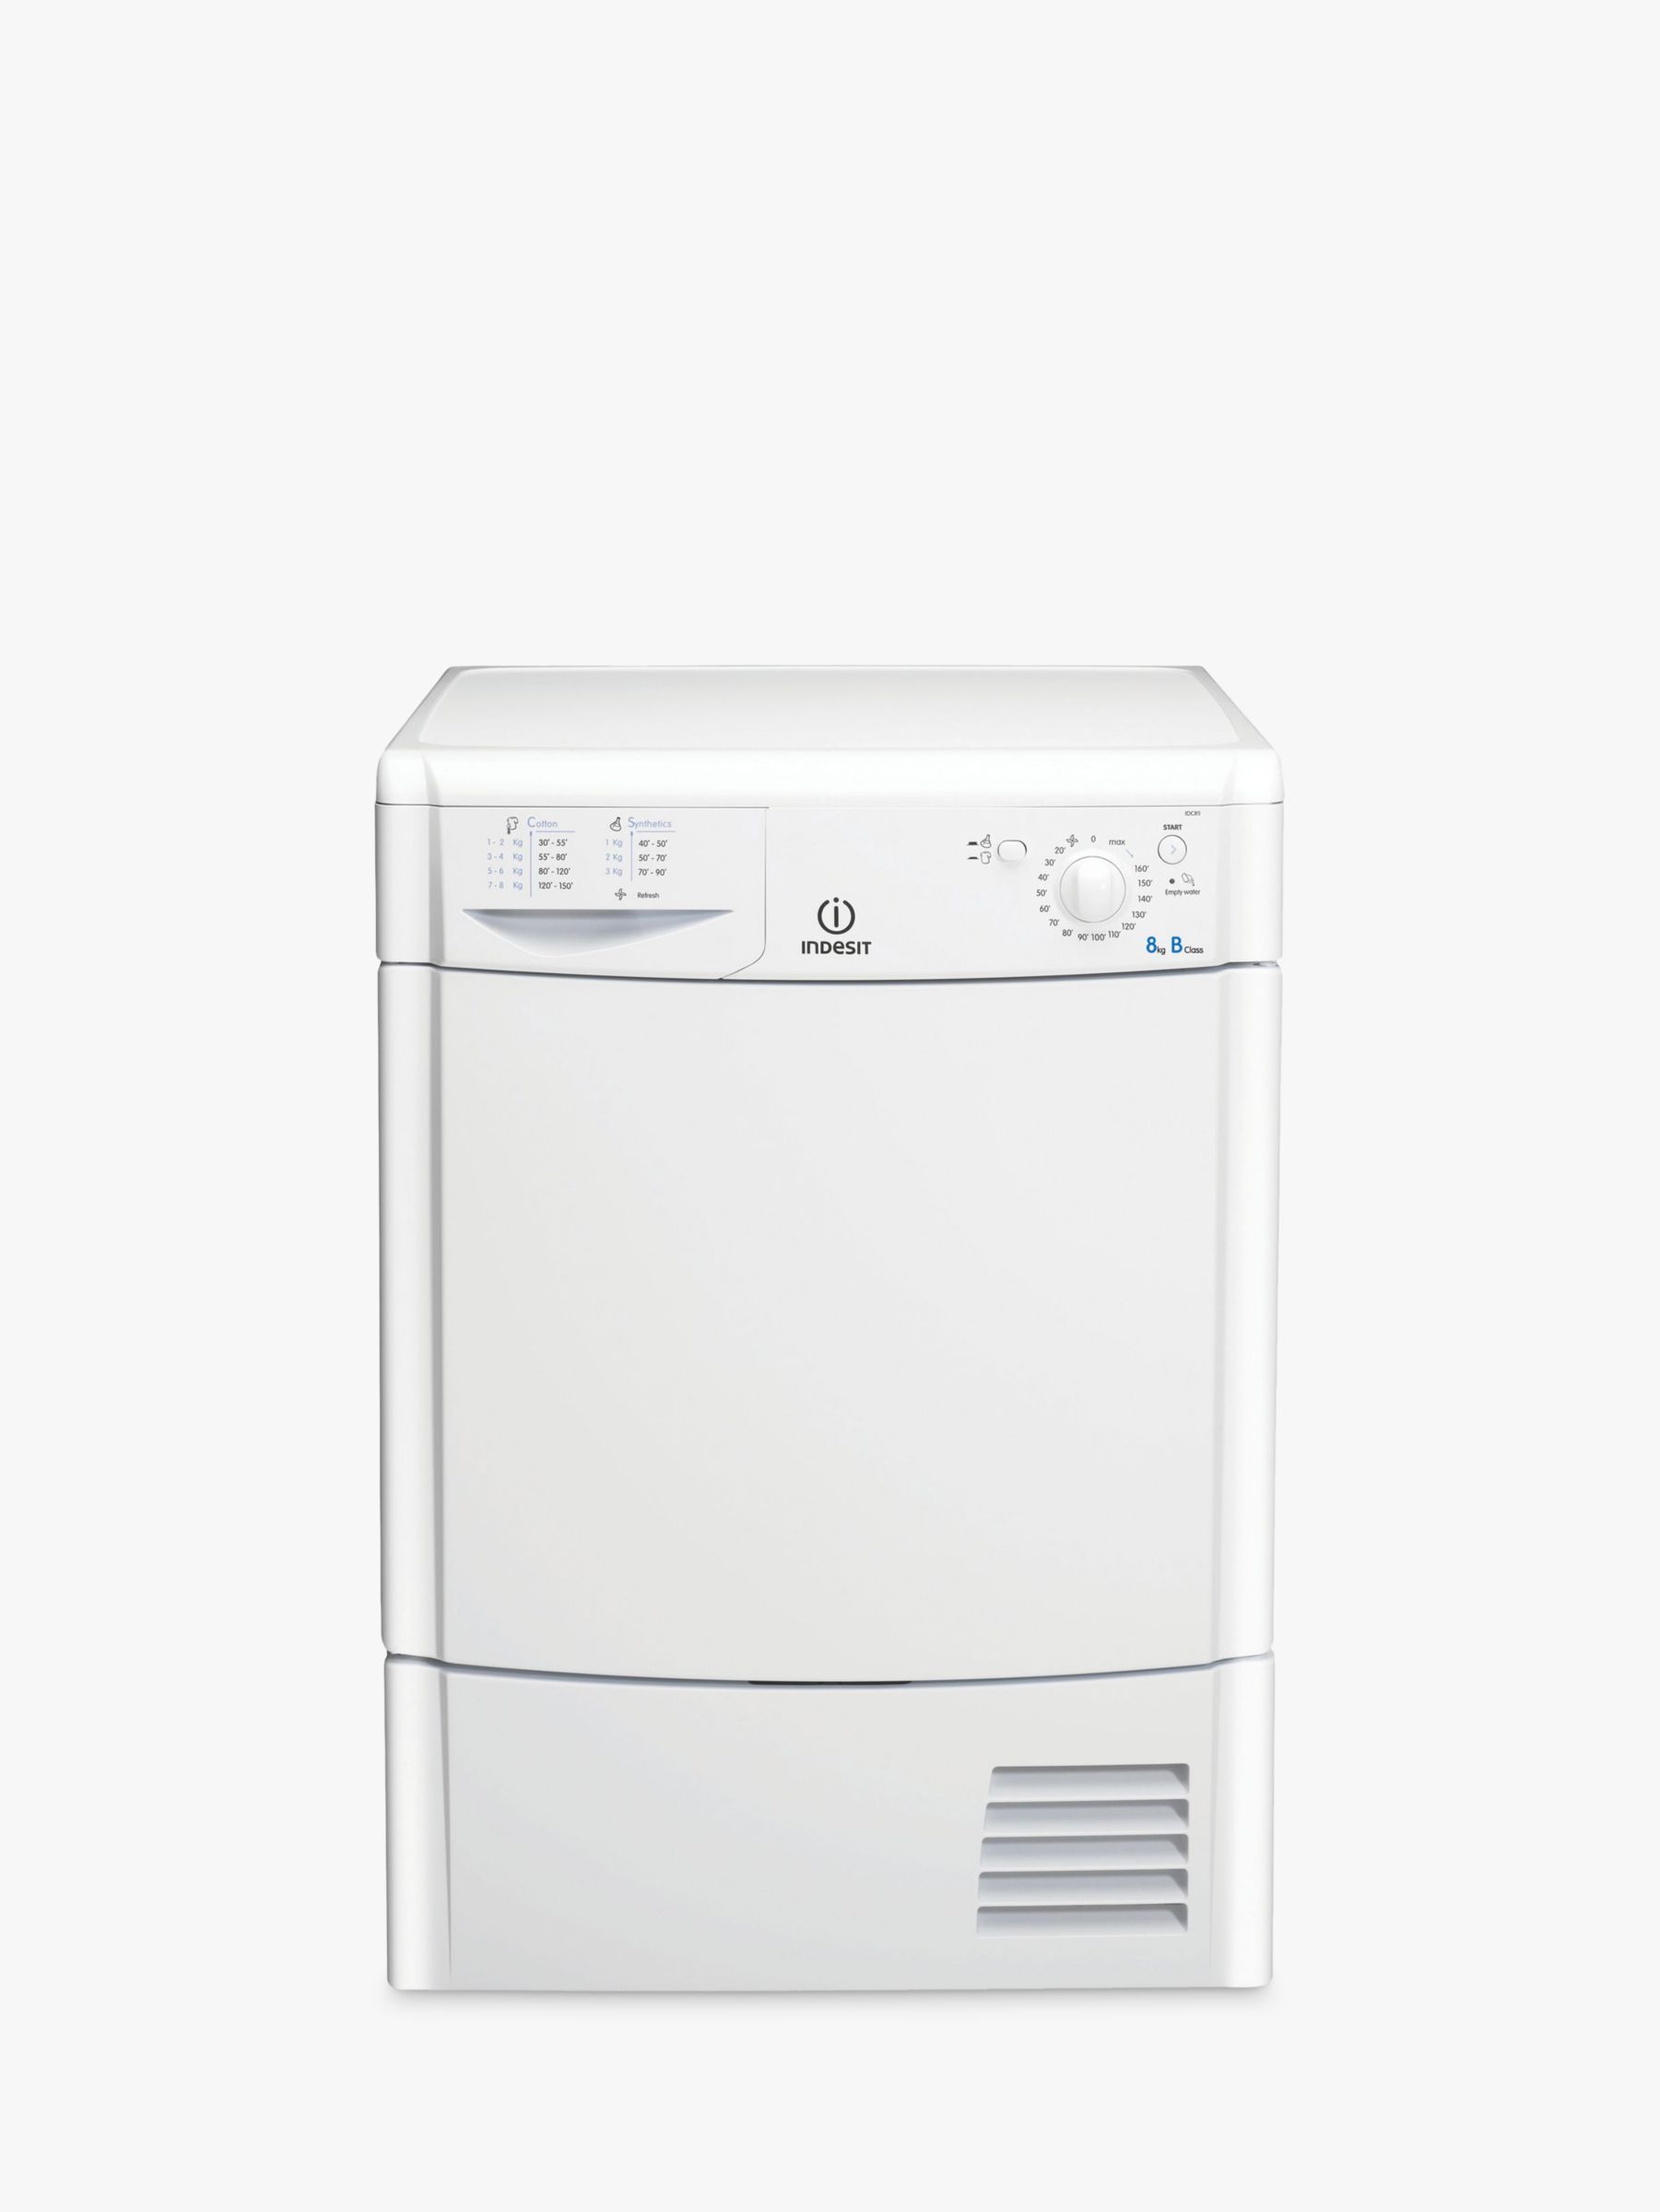 Indesit IDC8T3B Ecotime Freestanding Condenser Tumble Dryer, 8kg Load, B Energy Rating, White